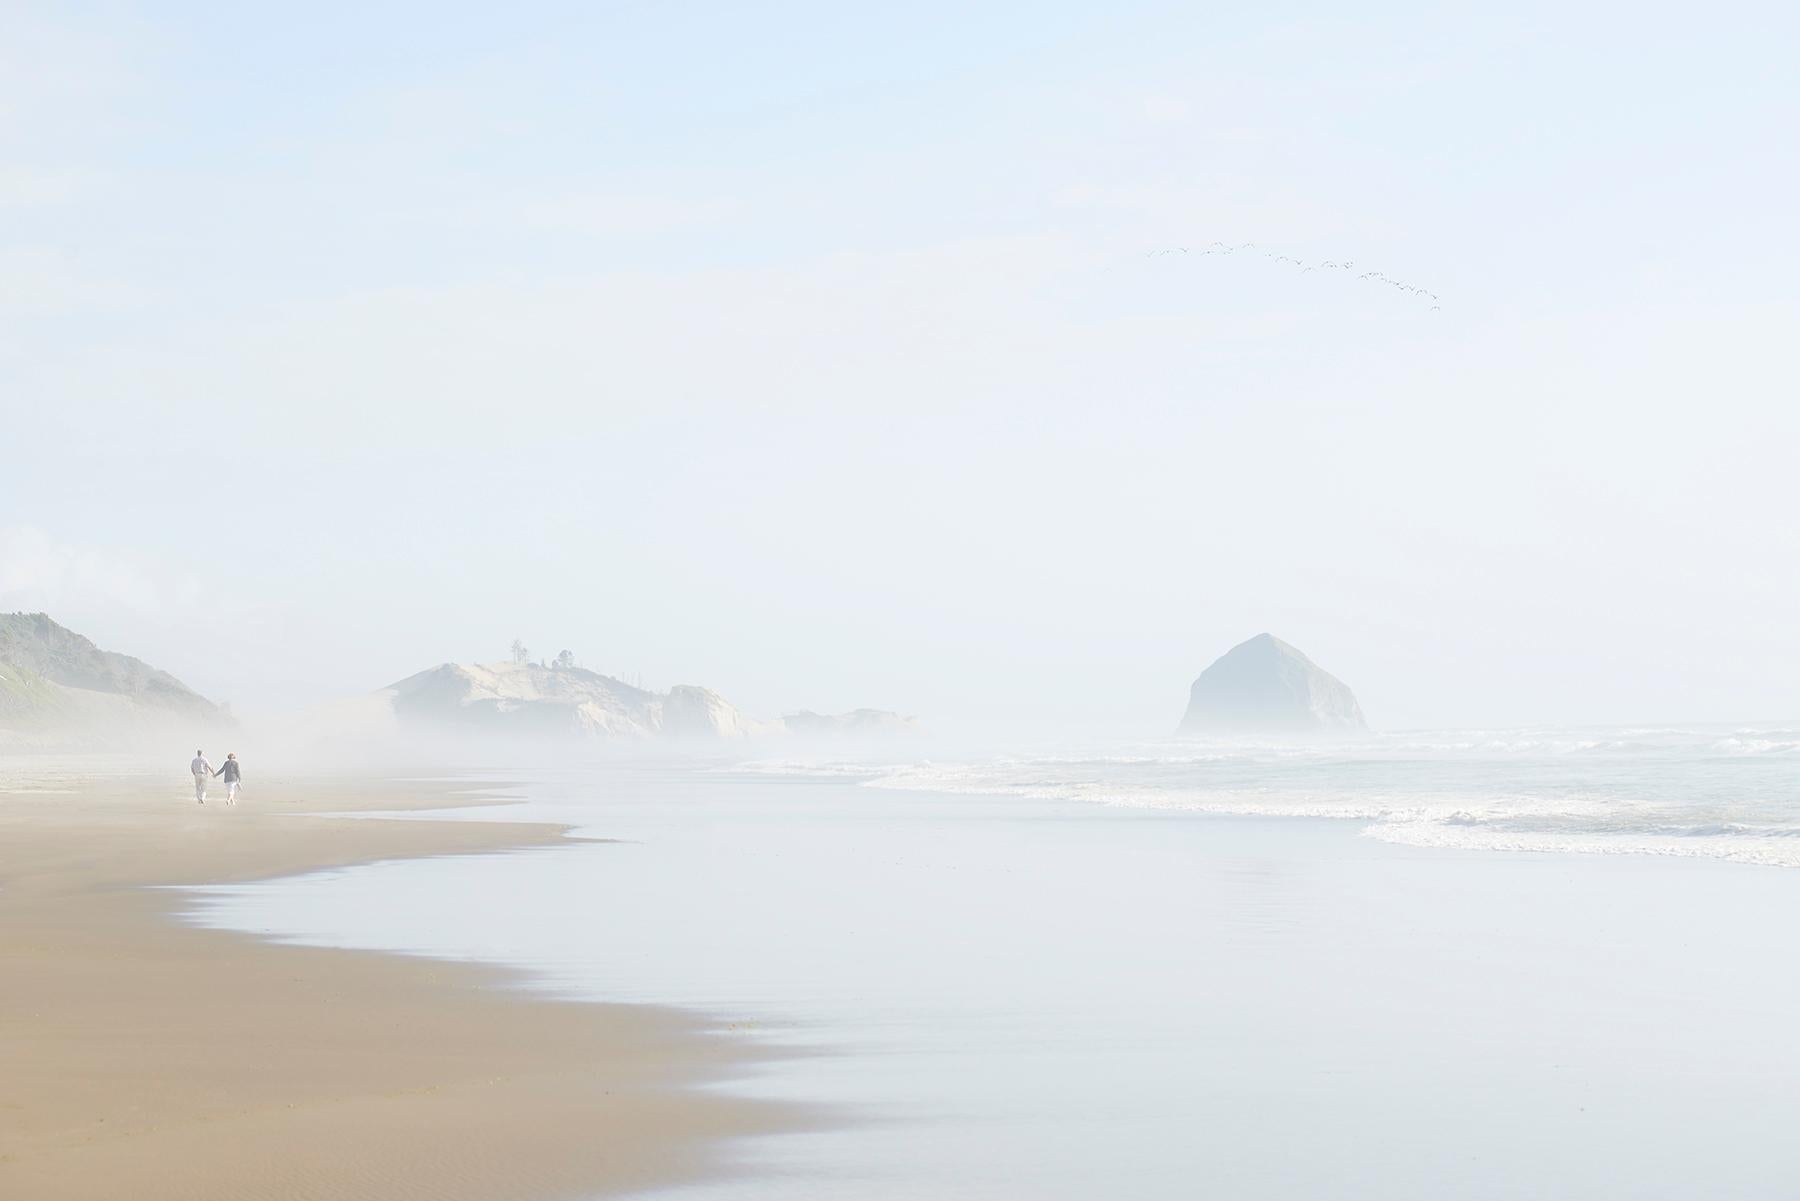 Pacific City
Digital C-Print / Archival Pigment Print
Edition of 10 per size
Available sizes:
40 x 60 in
60 x 90 in

Locations from around the world.

This photograph will be printed once payment has been received and will ship directly from the